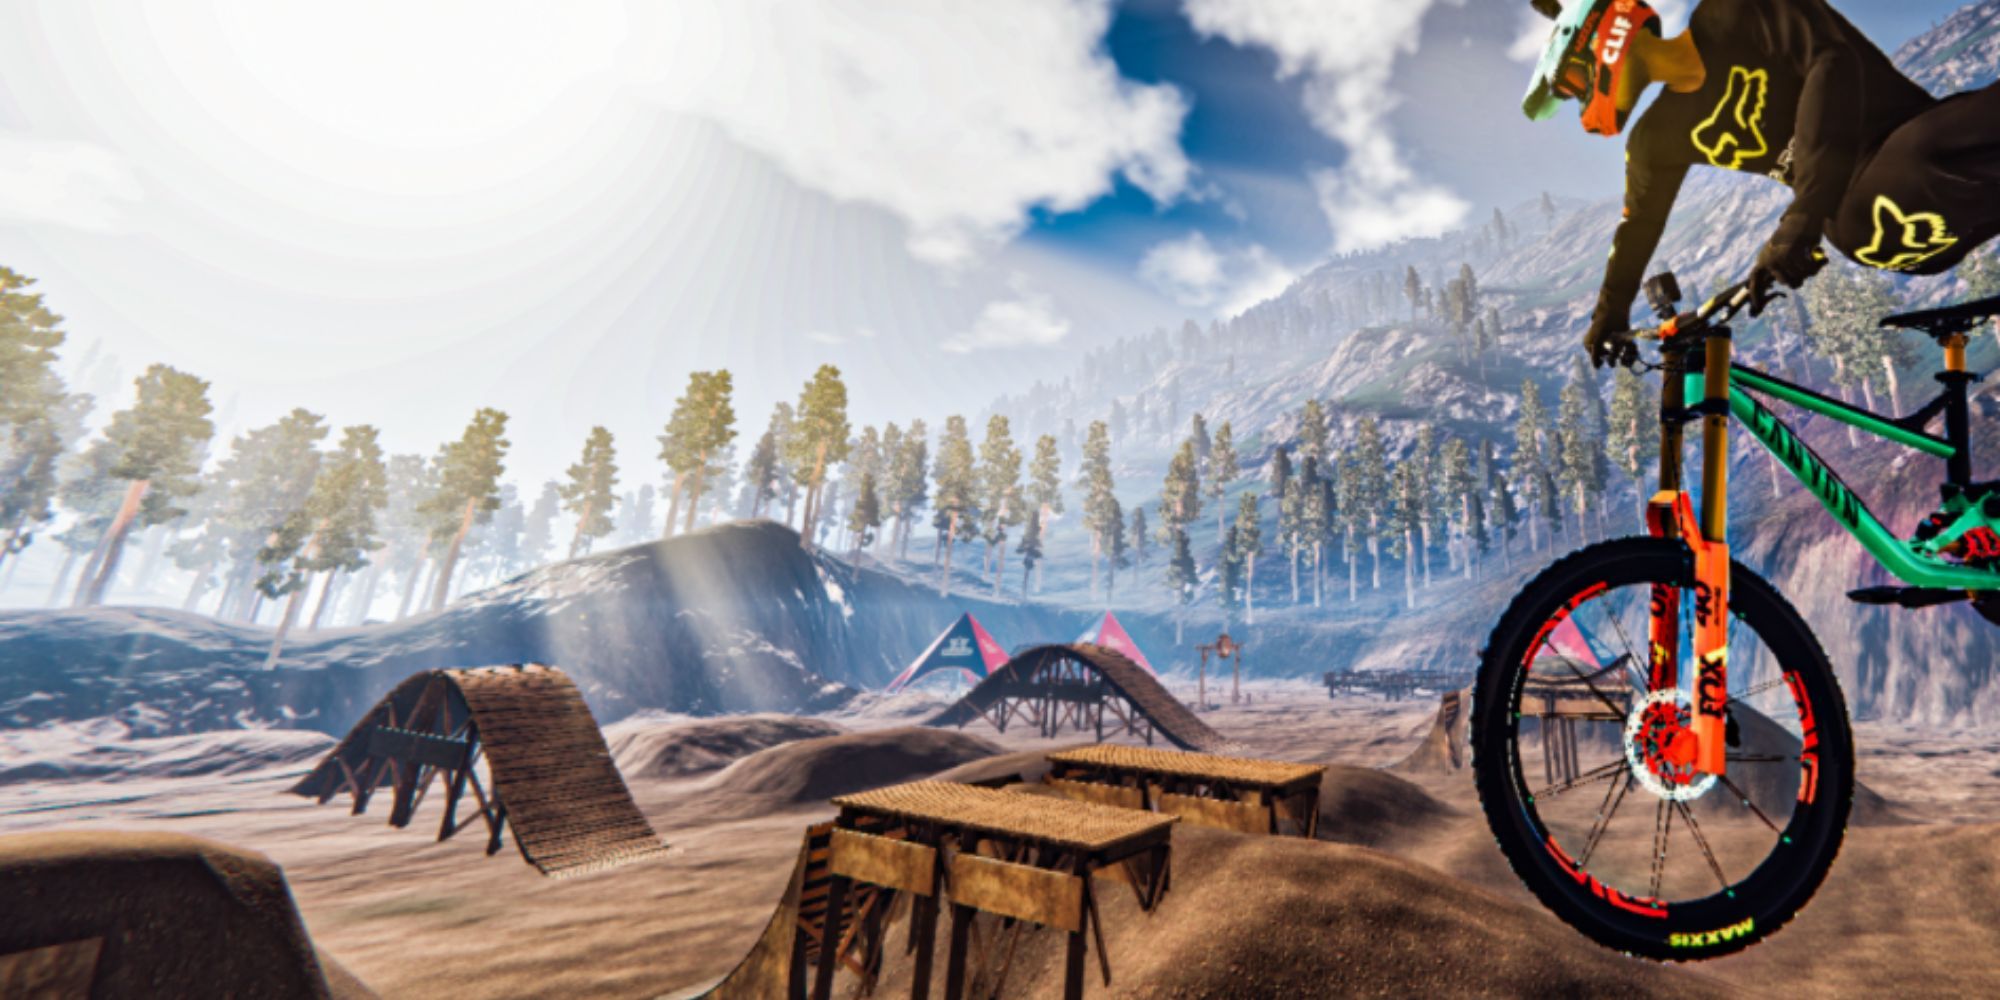 descenders_player_riding_on_mount_rosie_map